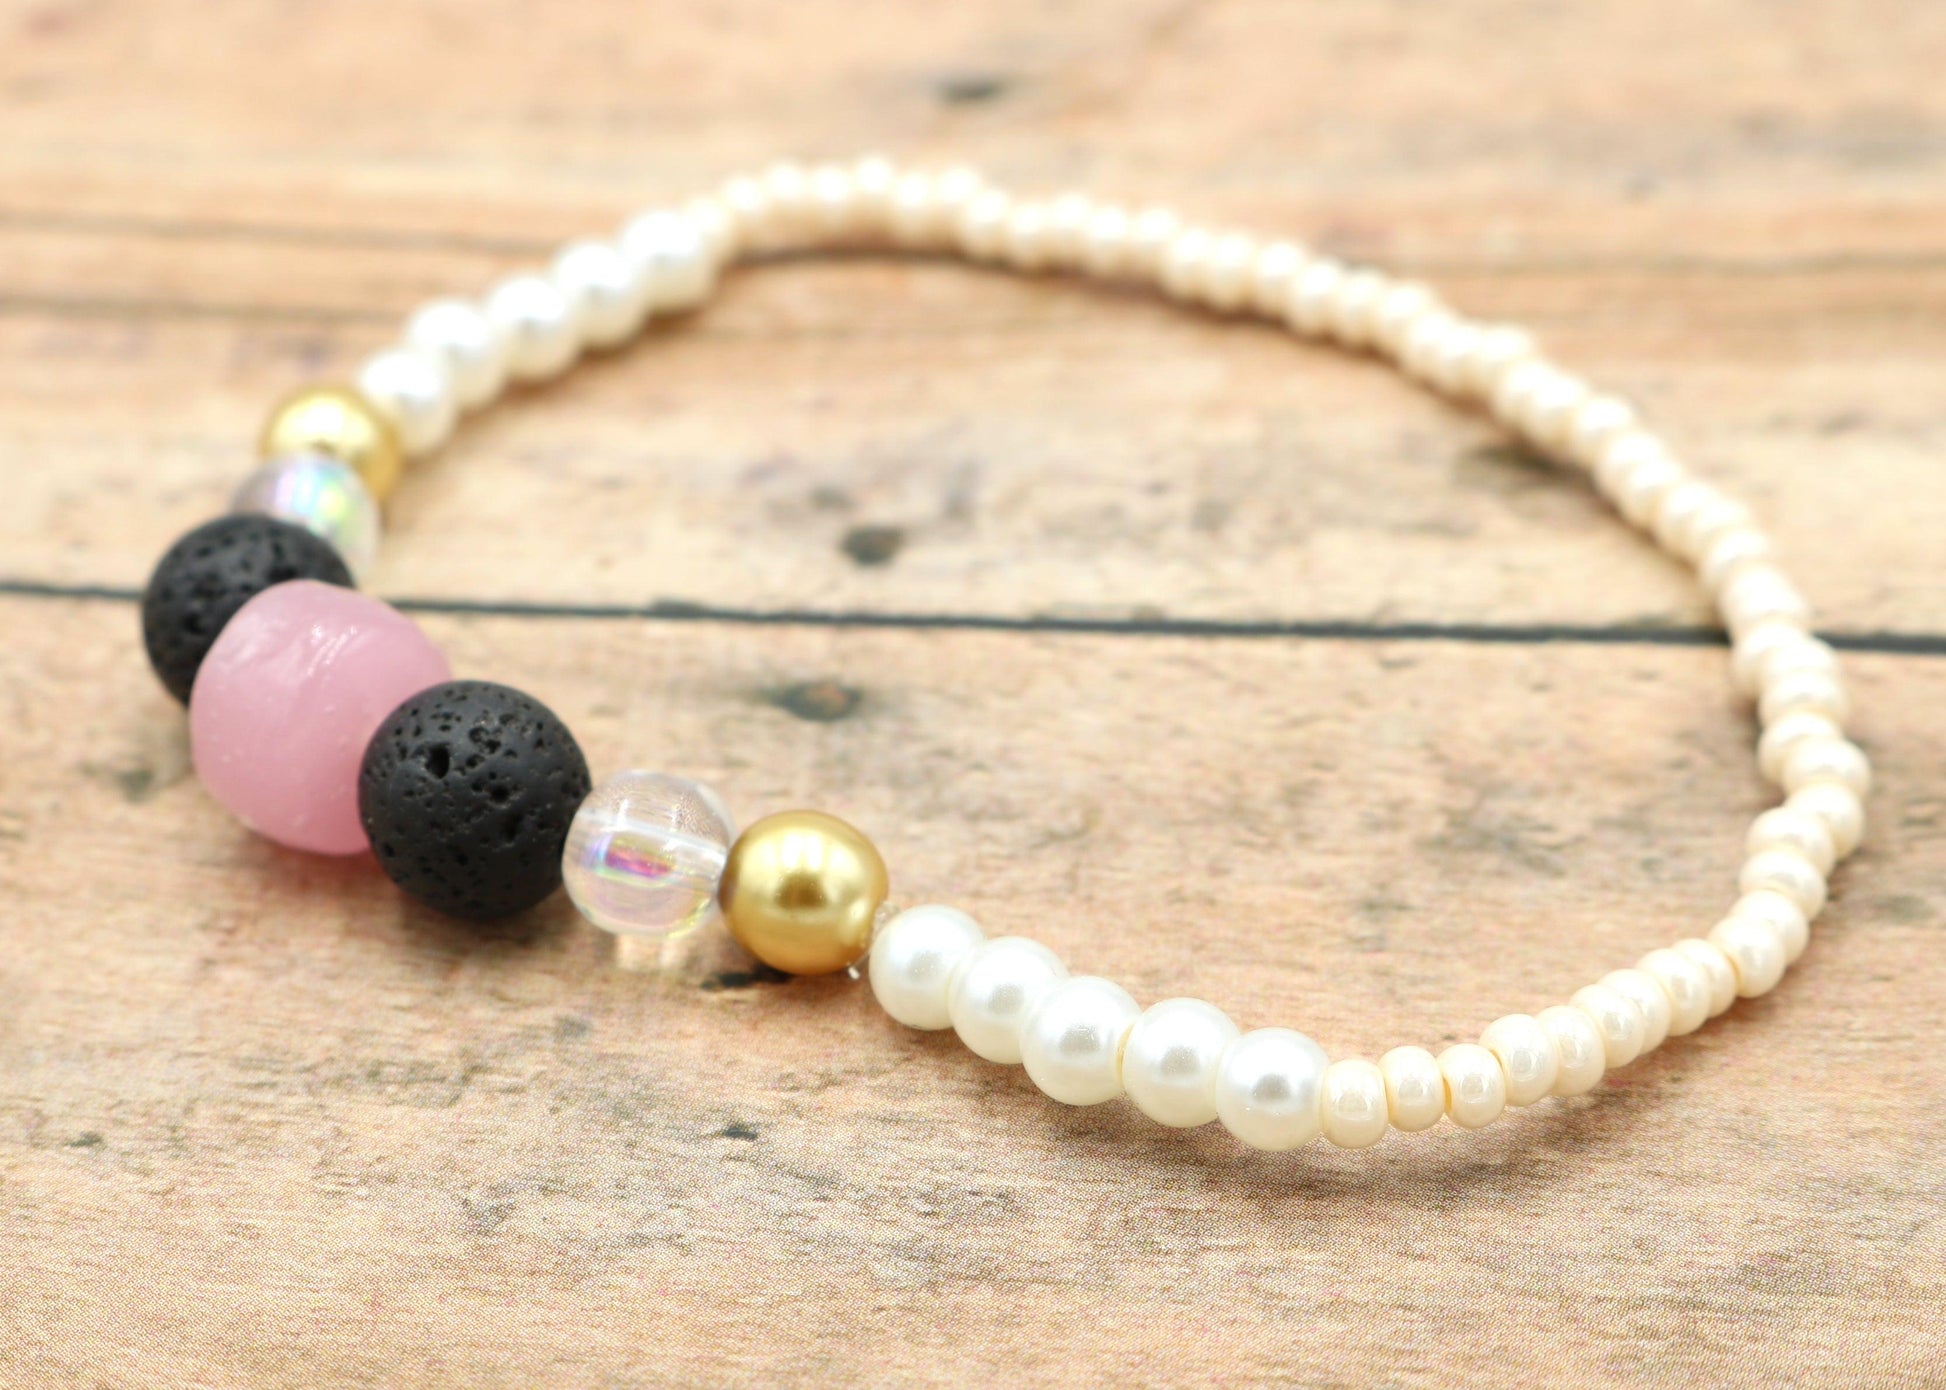 Rose in a Concrete Jungle - Rose Pink, Black, Yellow Gold, Pearls, and White Delight Women's Glass Bracelet - Monkeysmojo